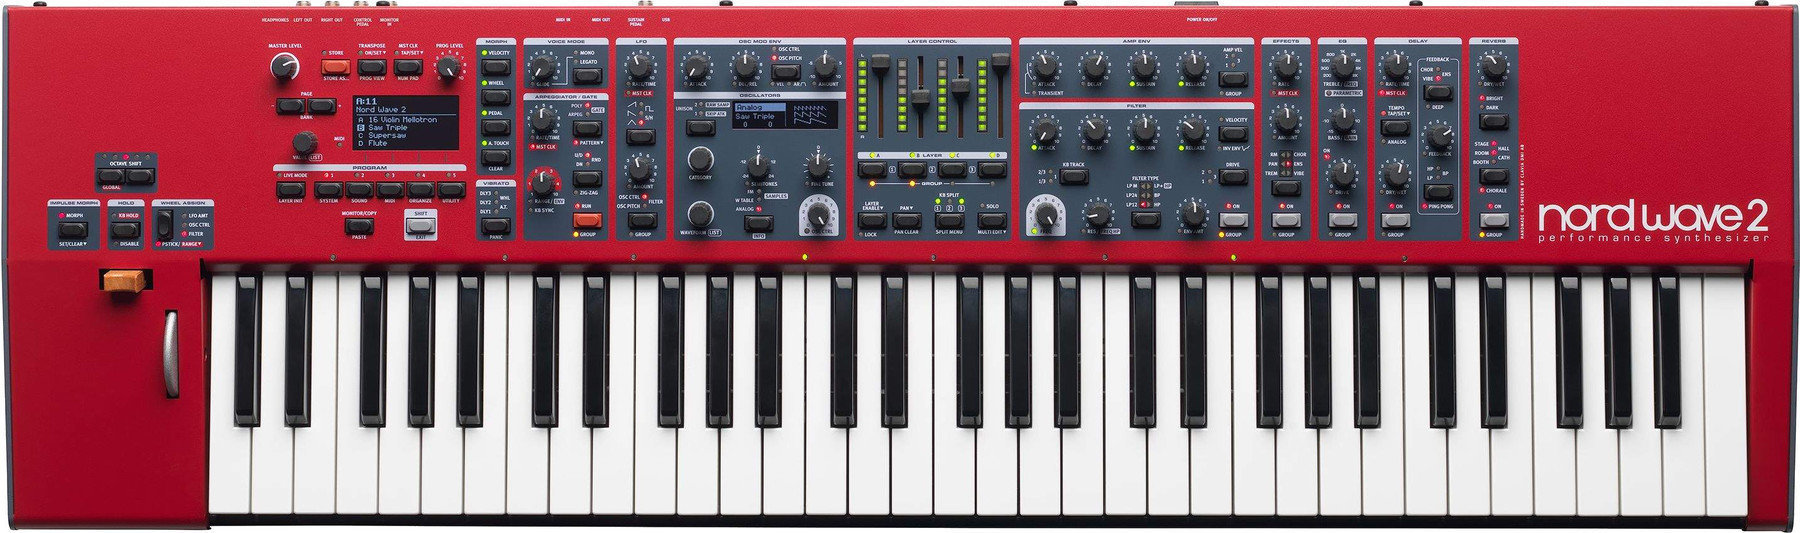 Synthétiseur NORD Wave 2 Rouge